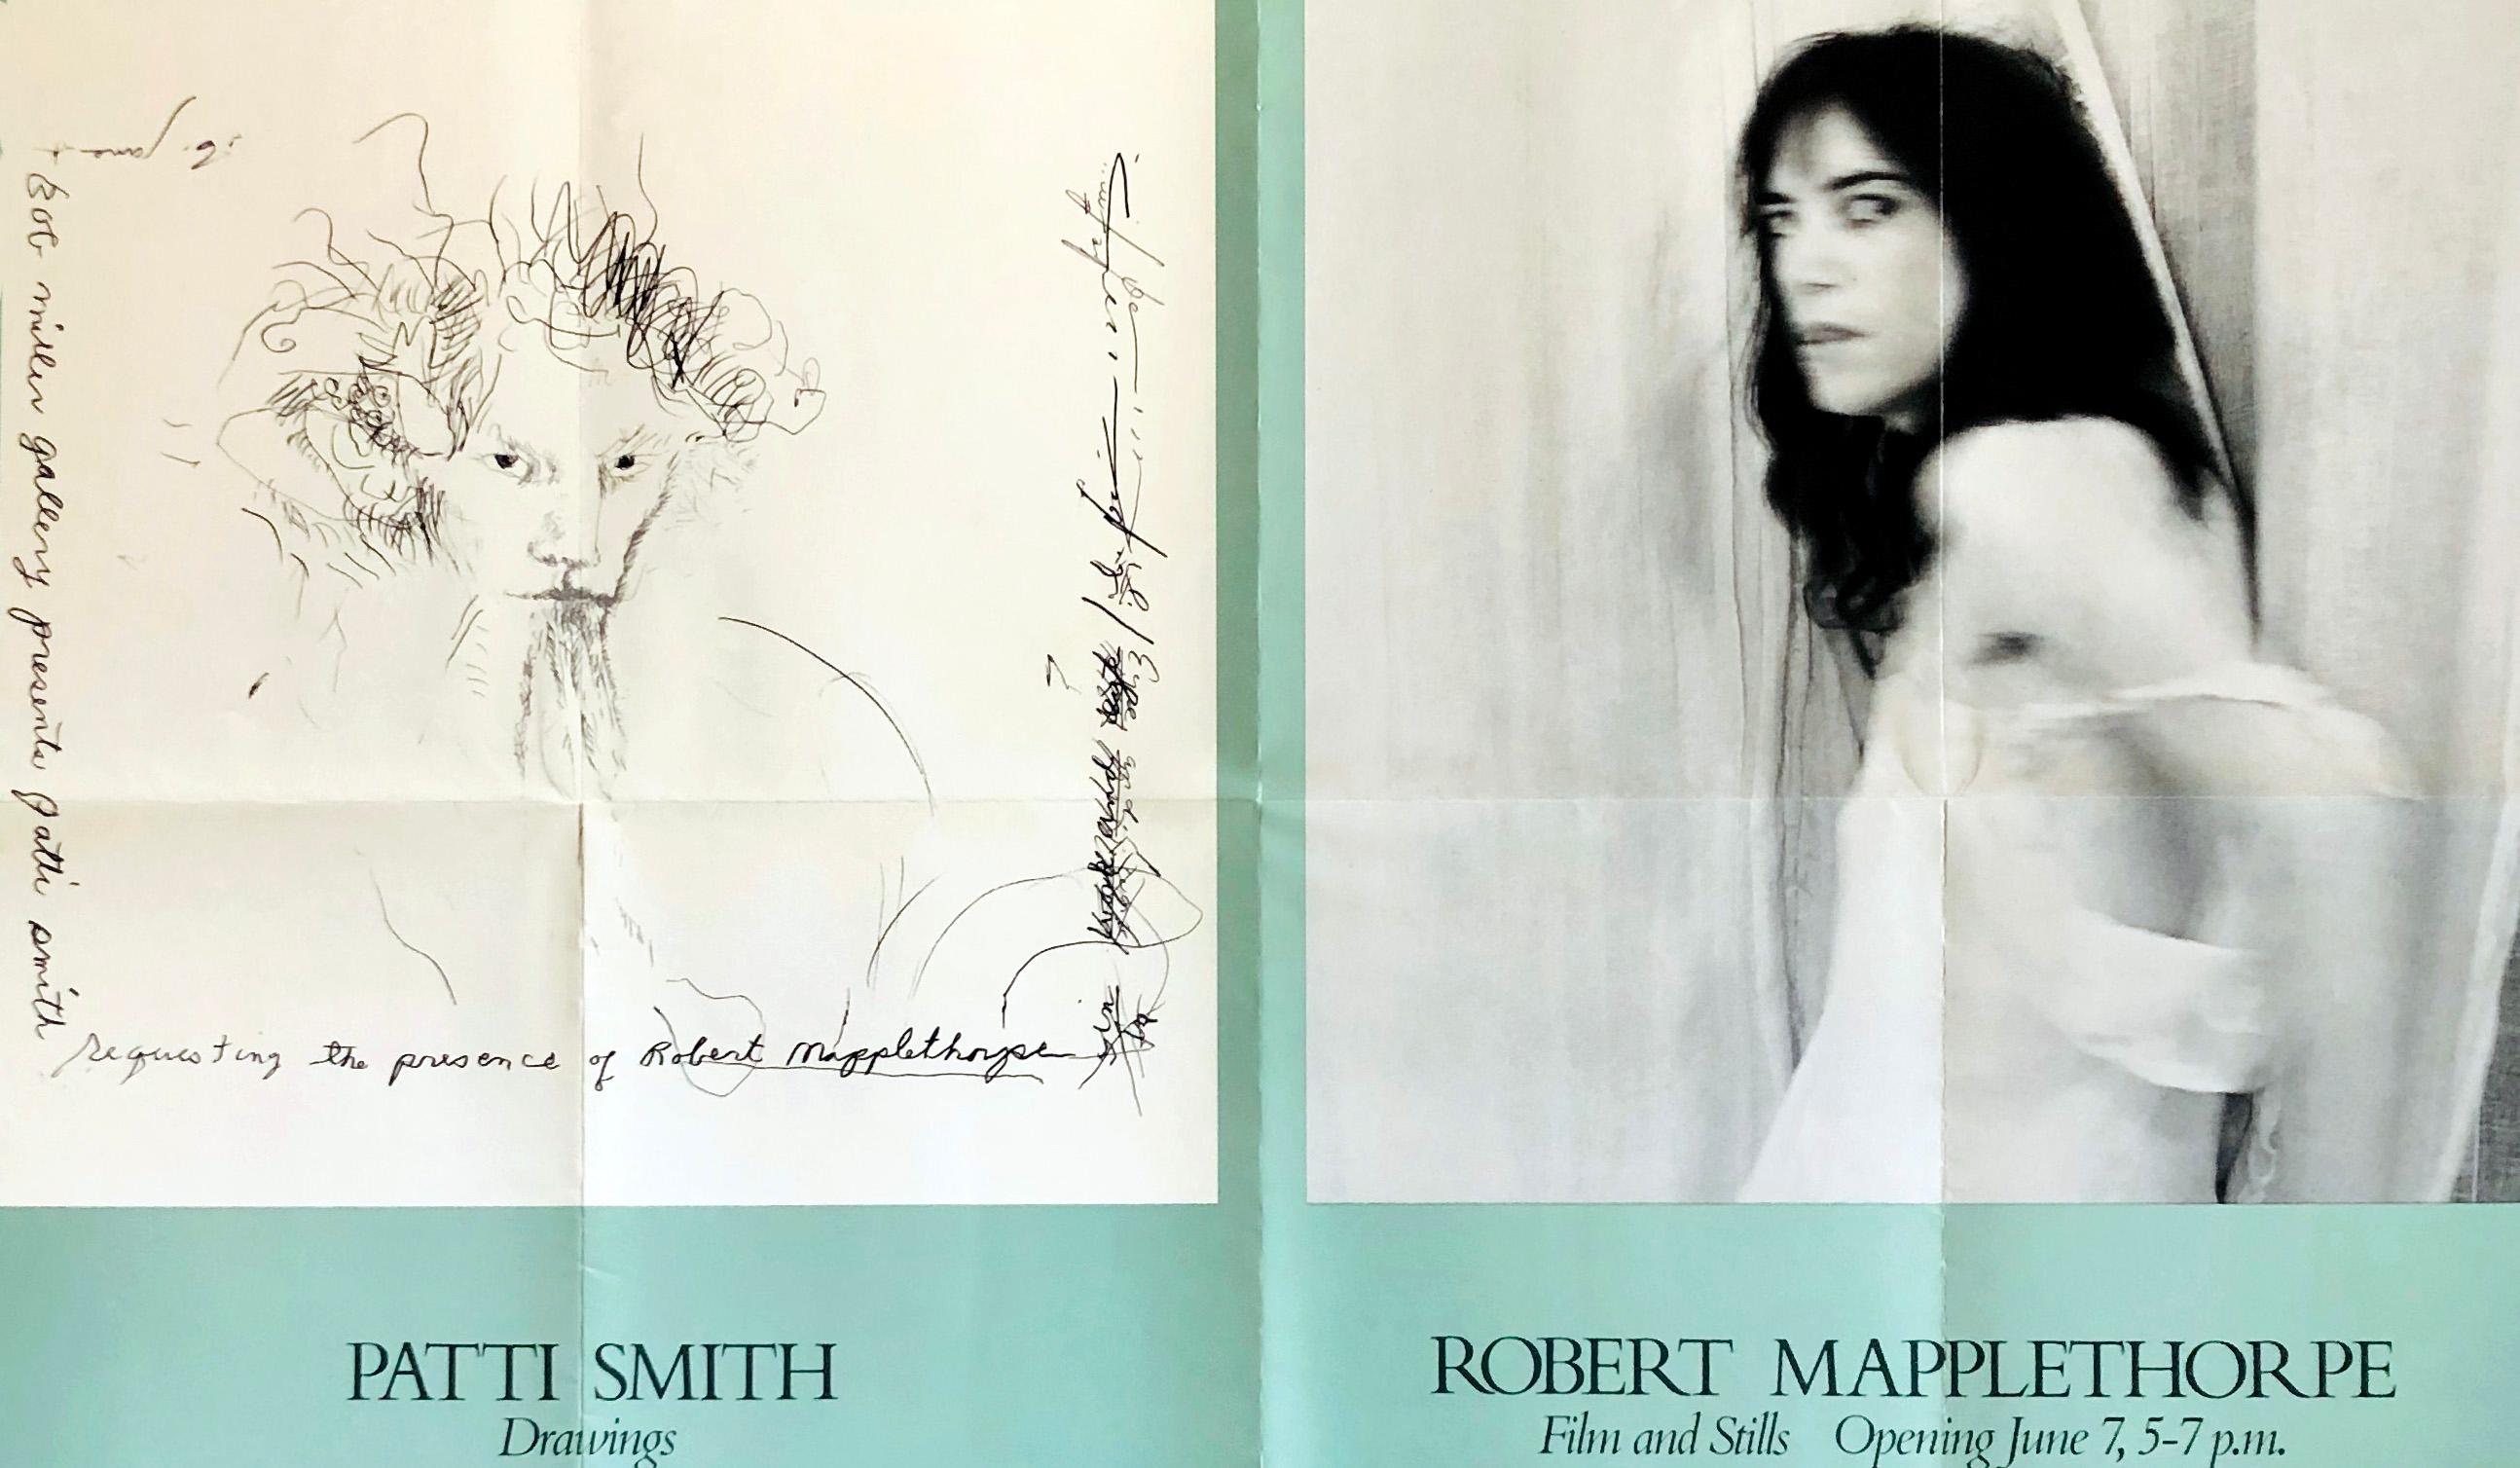 Original 1970s Patti Smith Robert Mapplethorpe Exhibition Poster:
Published on occasion of, 'Patti Smith Drawings / Robert Mapplethorpe Film and Stills: Robert Miller Gallery, New York, June 7 1978.' Features offset images of a Mapplethorpe drawing